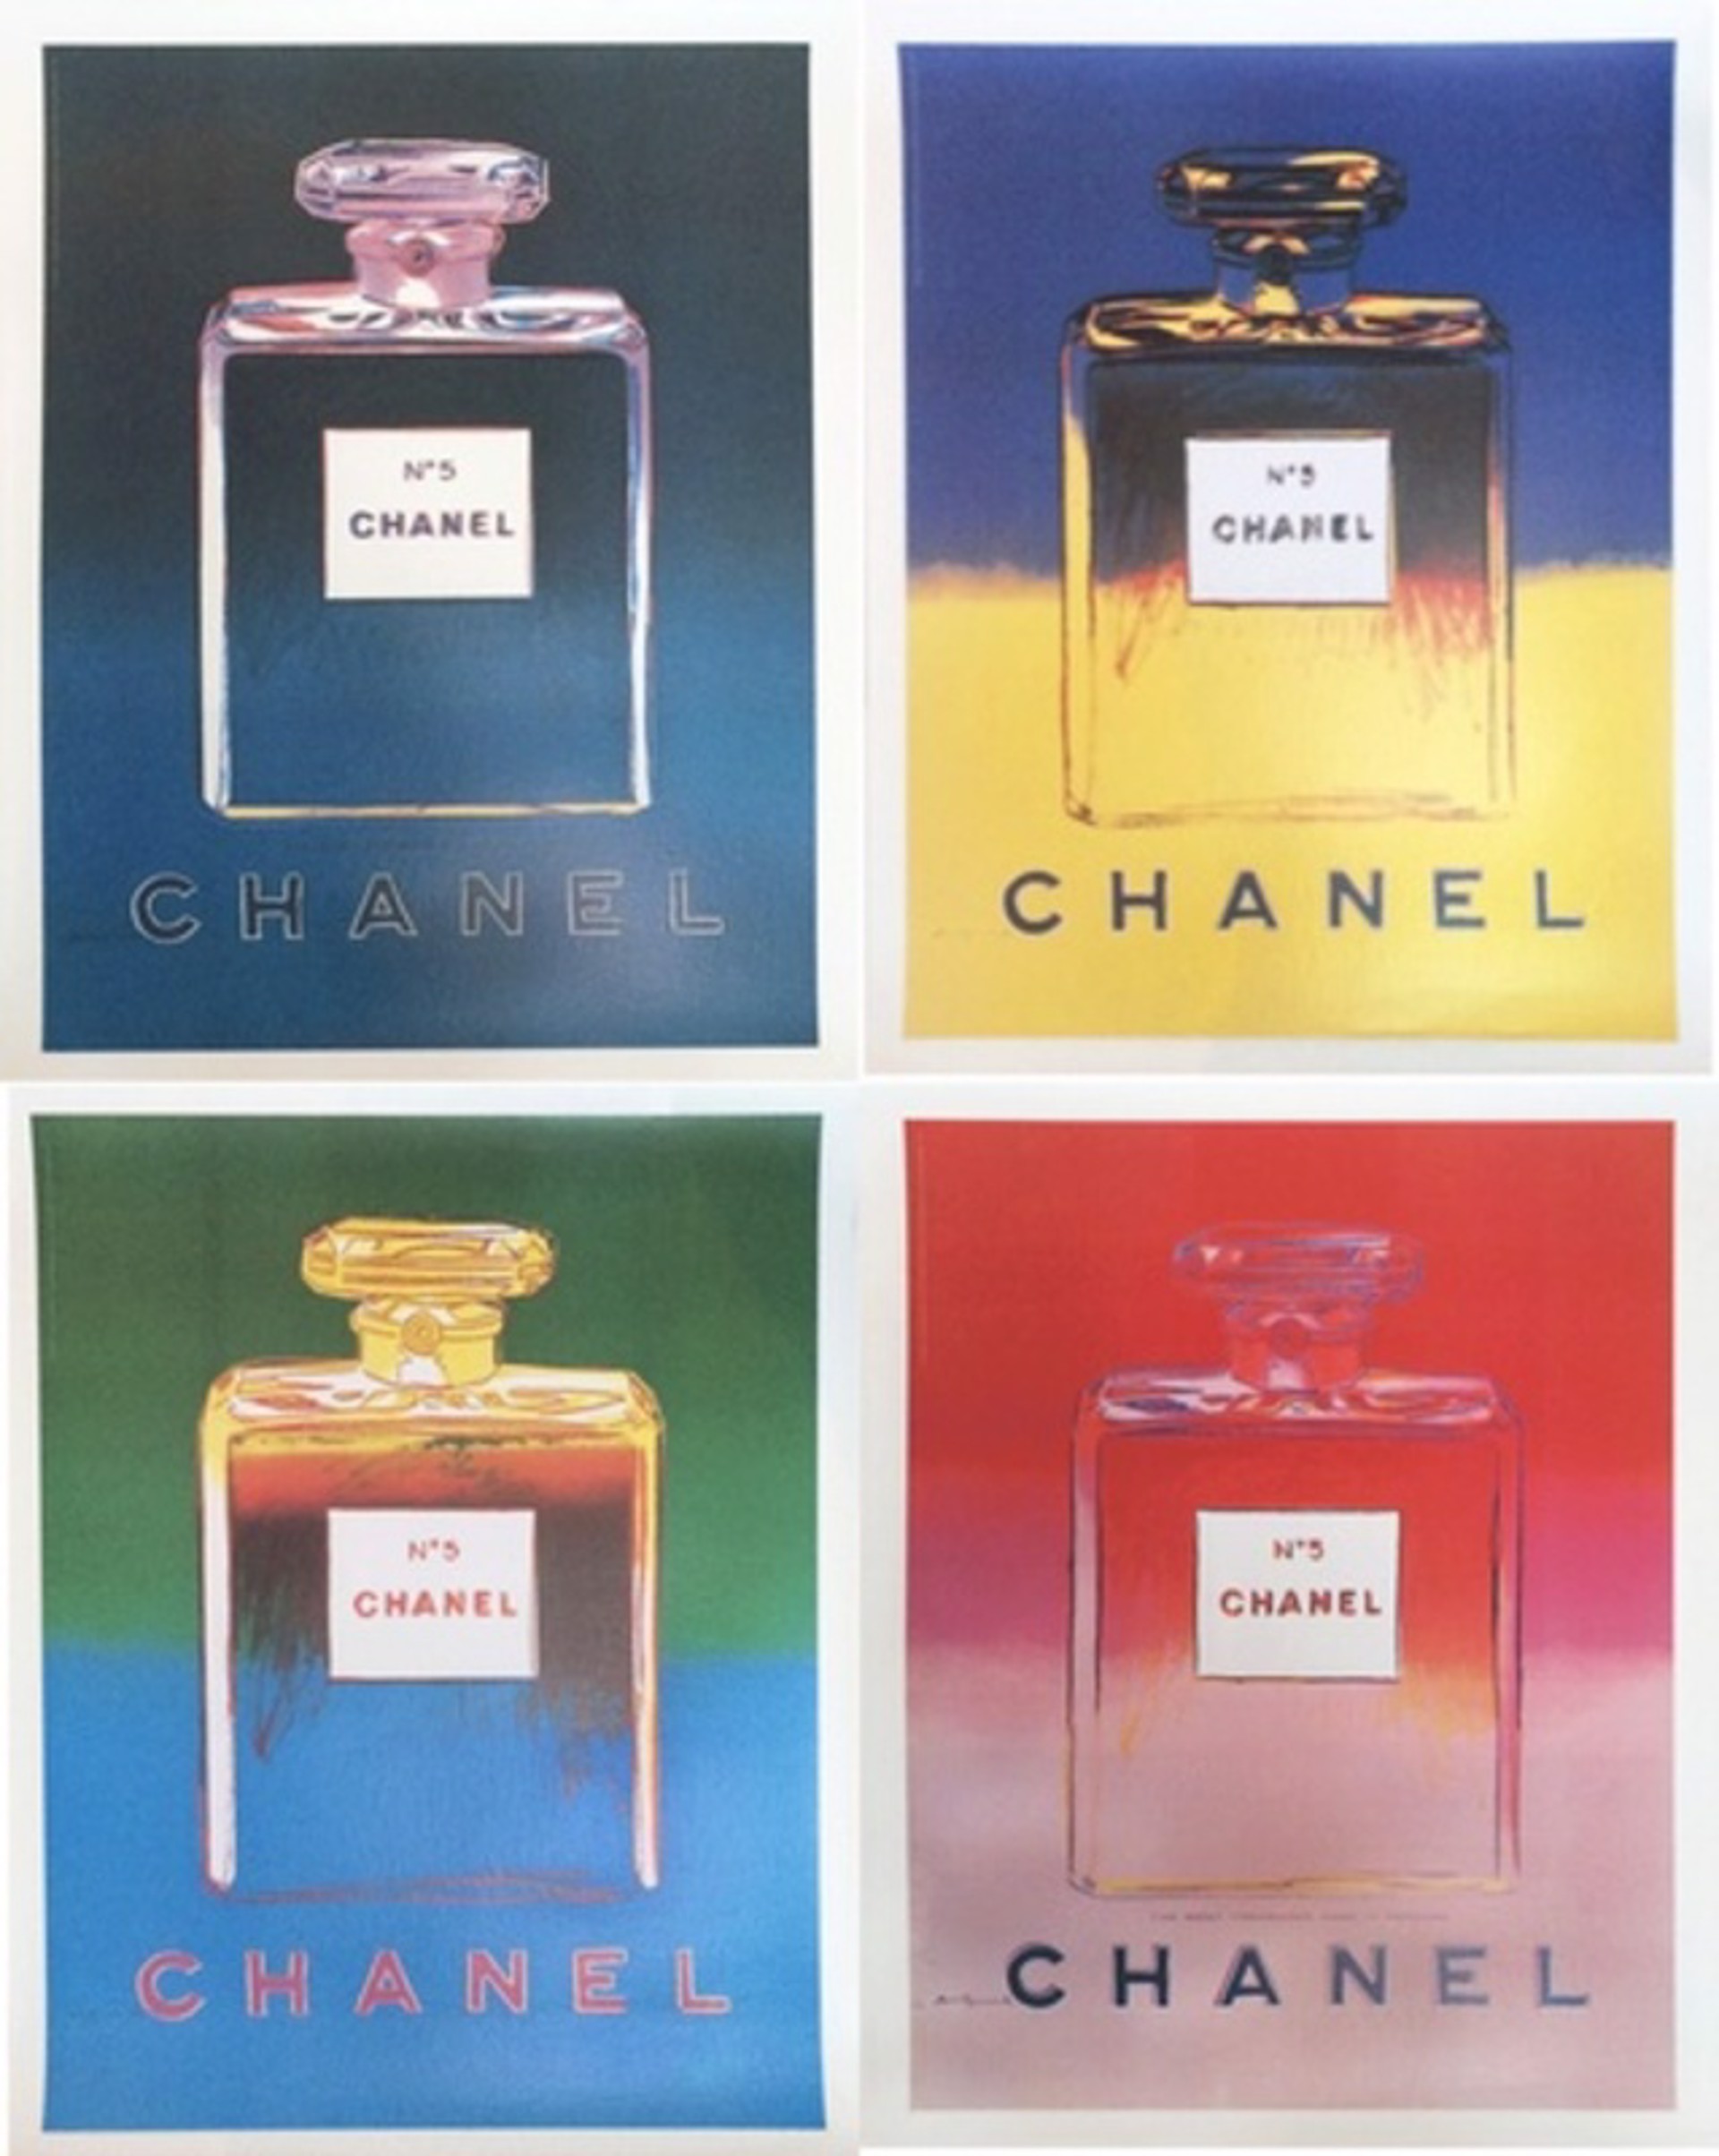 Chanel No. 5 by Andy Warhol (1928 - 1987)